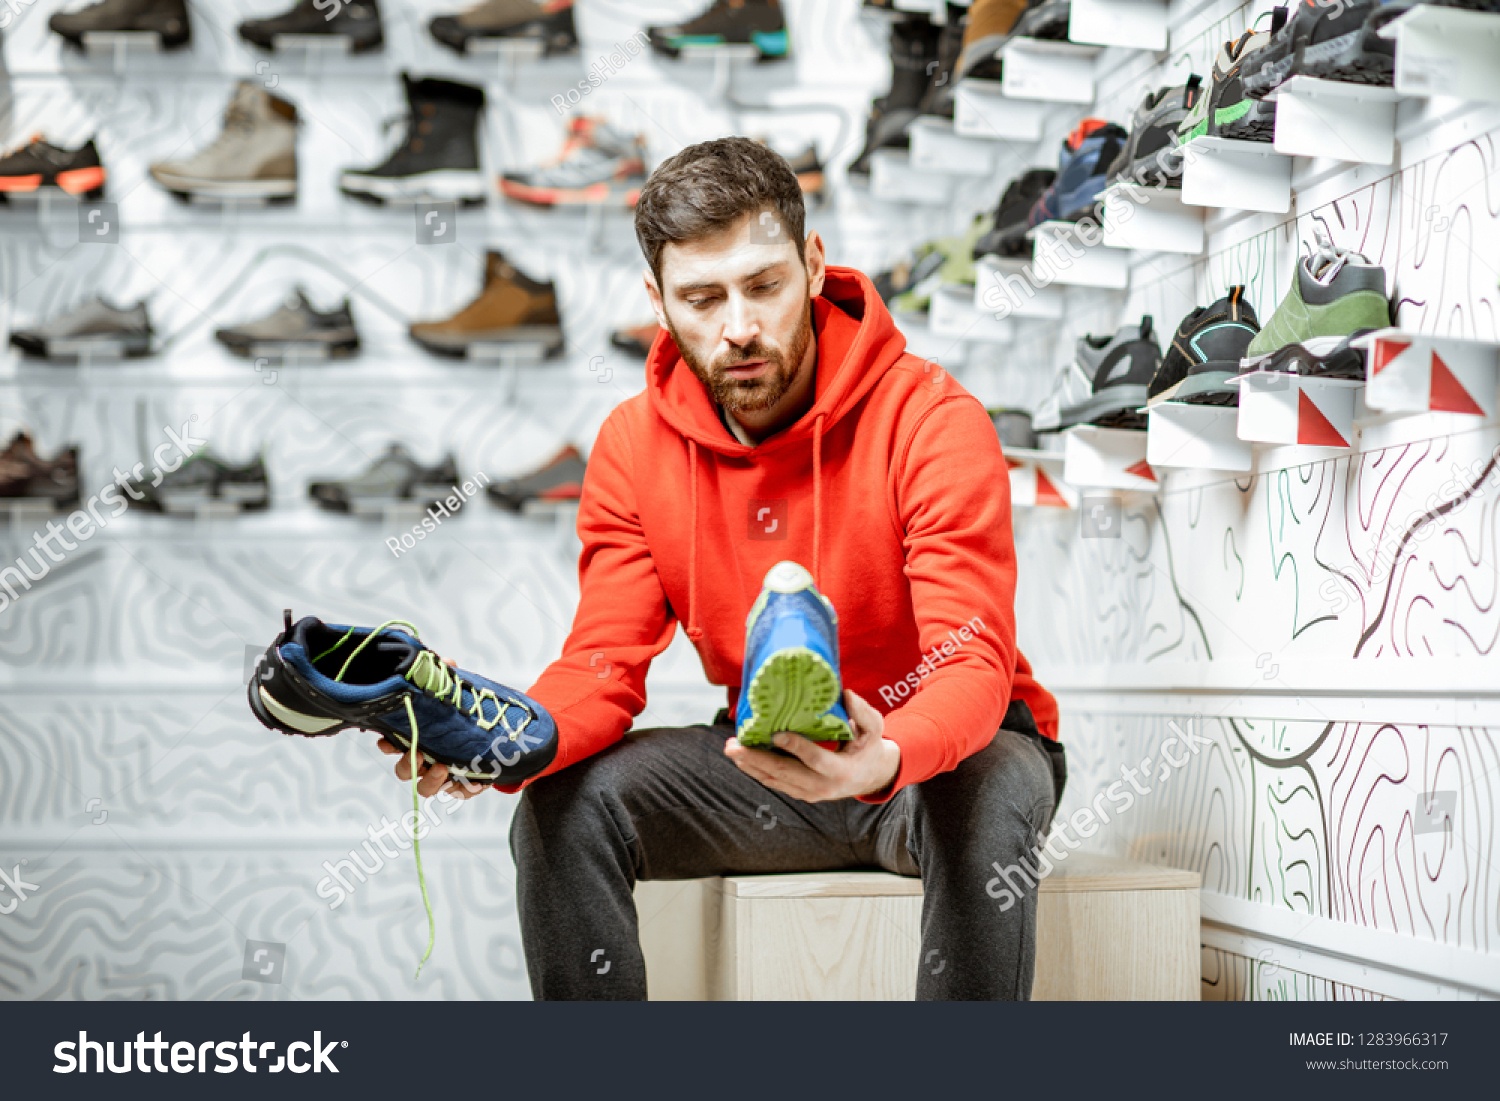 Man choosing trail shoes for hiking sitting in the fitting room of the modern sports shop #1283966317